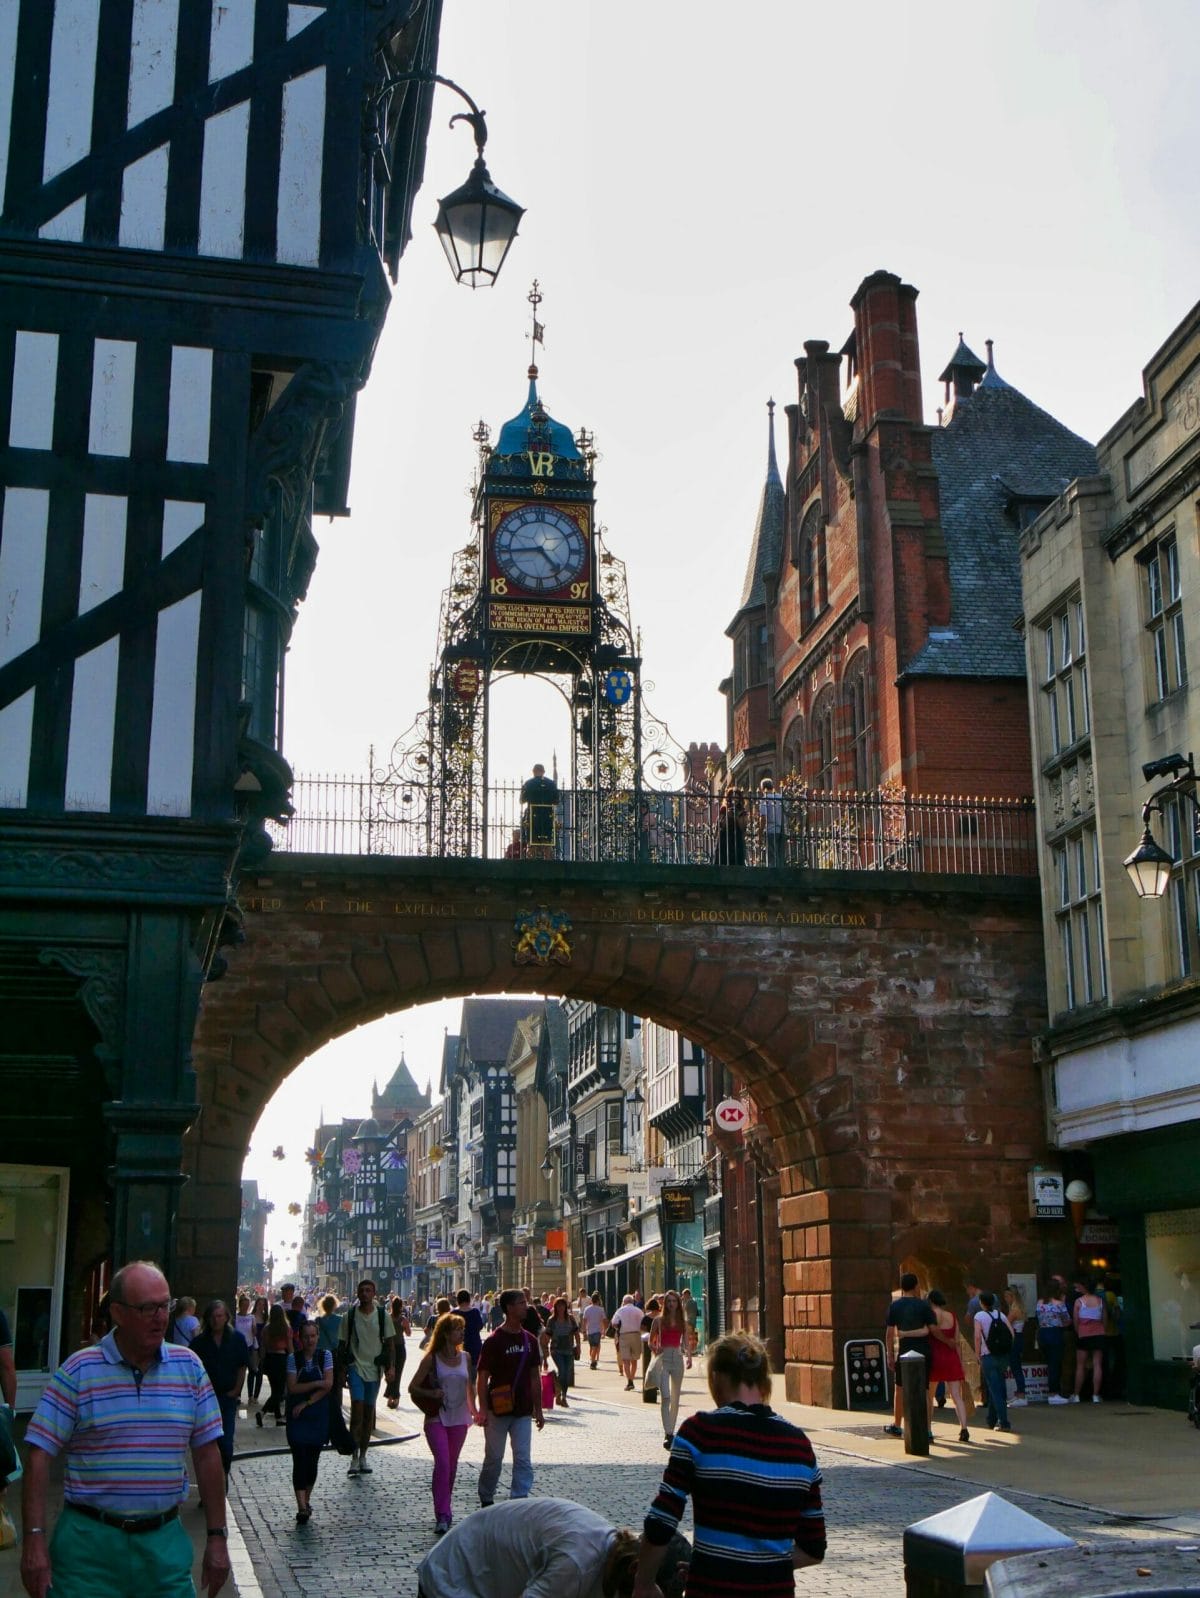 Chester High Street with an old, ornate clock on top of a bridge